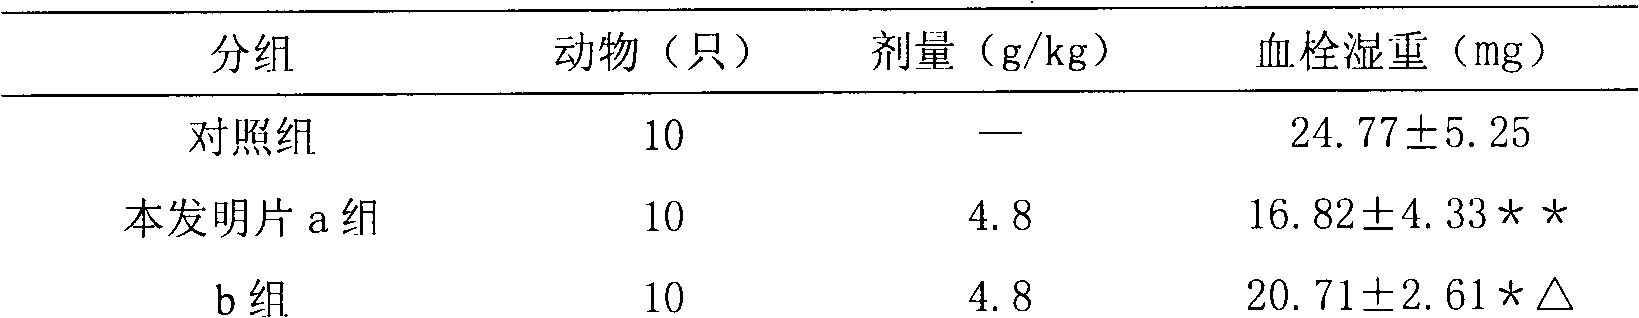 Traditional Chinese medicine composition used for treating coronary heart disease and cerebral arteriosclerosis, and preparation method thereof